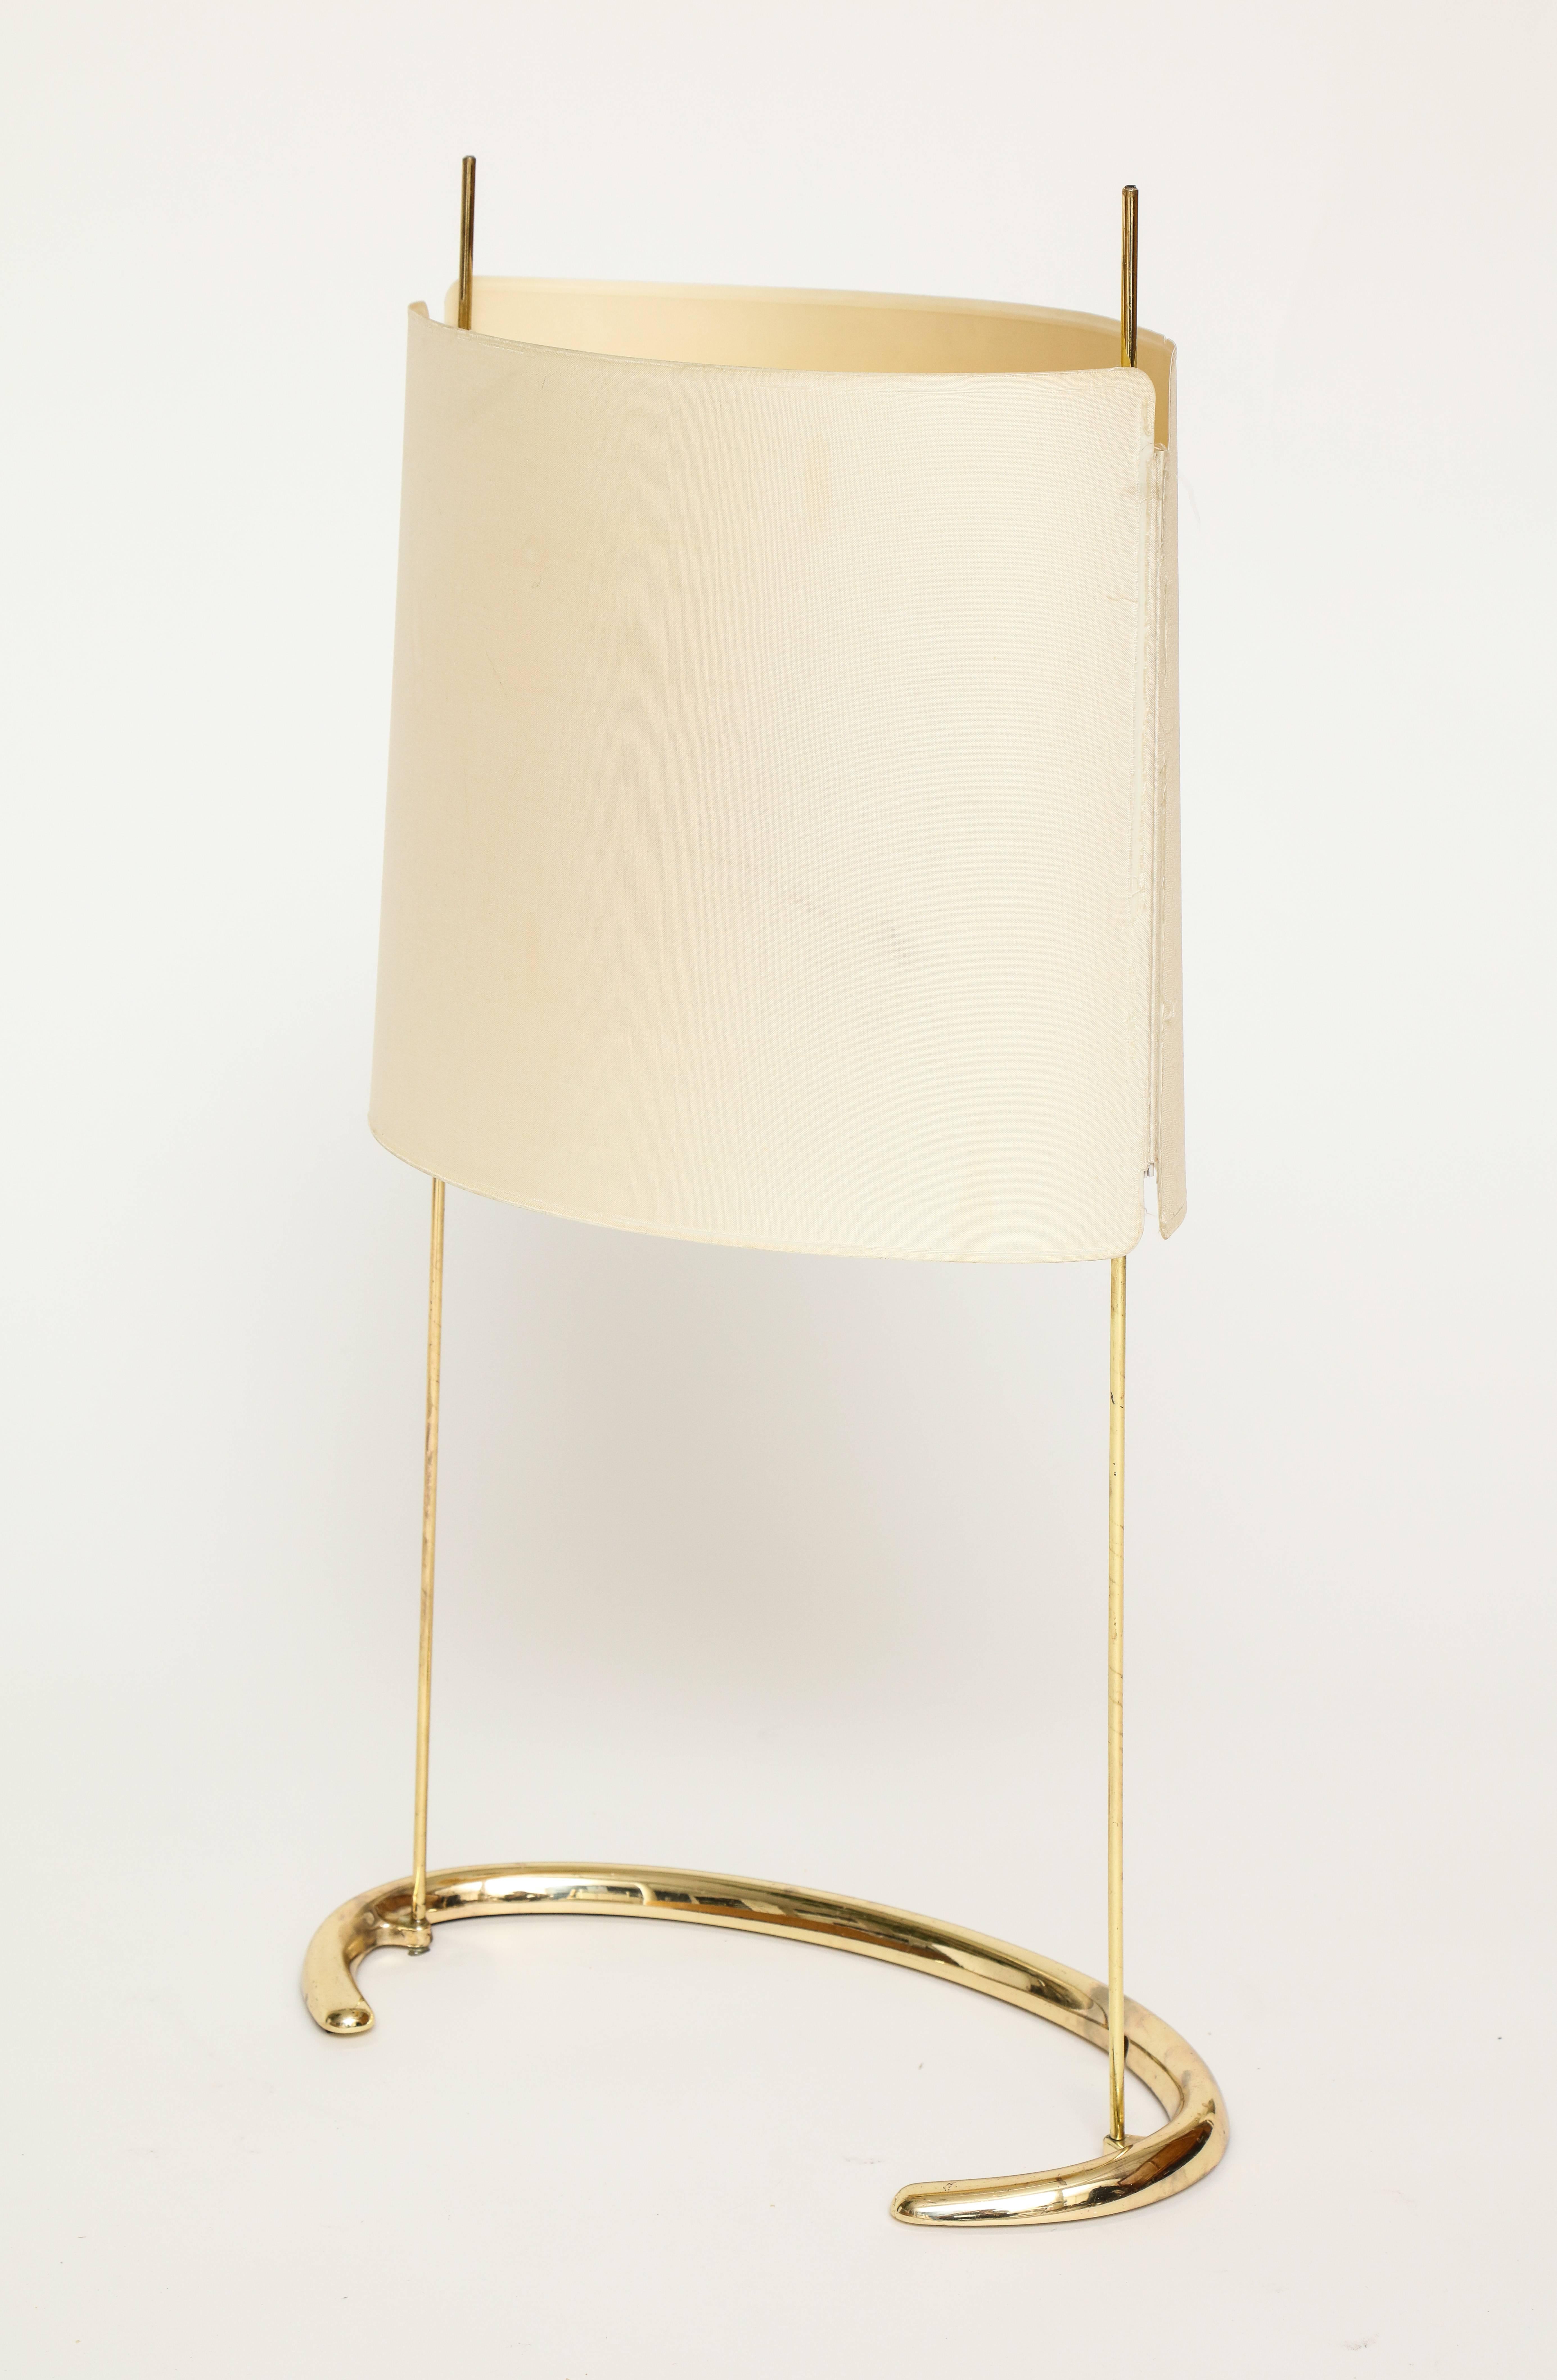 Gala table lamp Arteluce Paolo Rizzatto brass Italian, 1970s.

Great example of chic 1970s Italian design. Brass Base and creme shade designed by Paolo Rizzatto. Era of Gabriella Crespi.

Measures: Height: 26 inches.
Width: 15 inches.
depth: 7